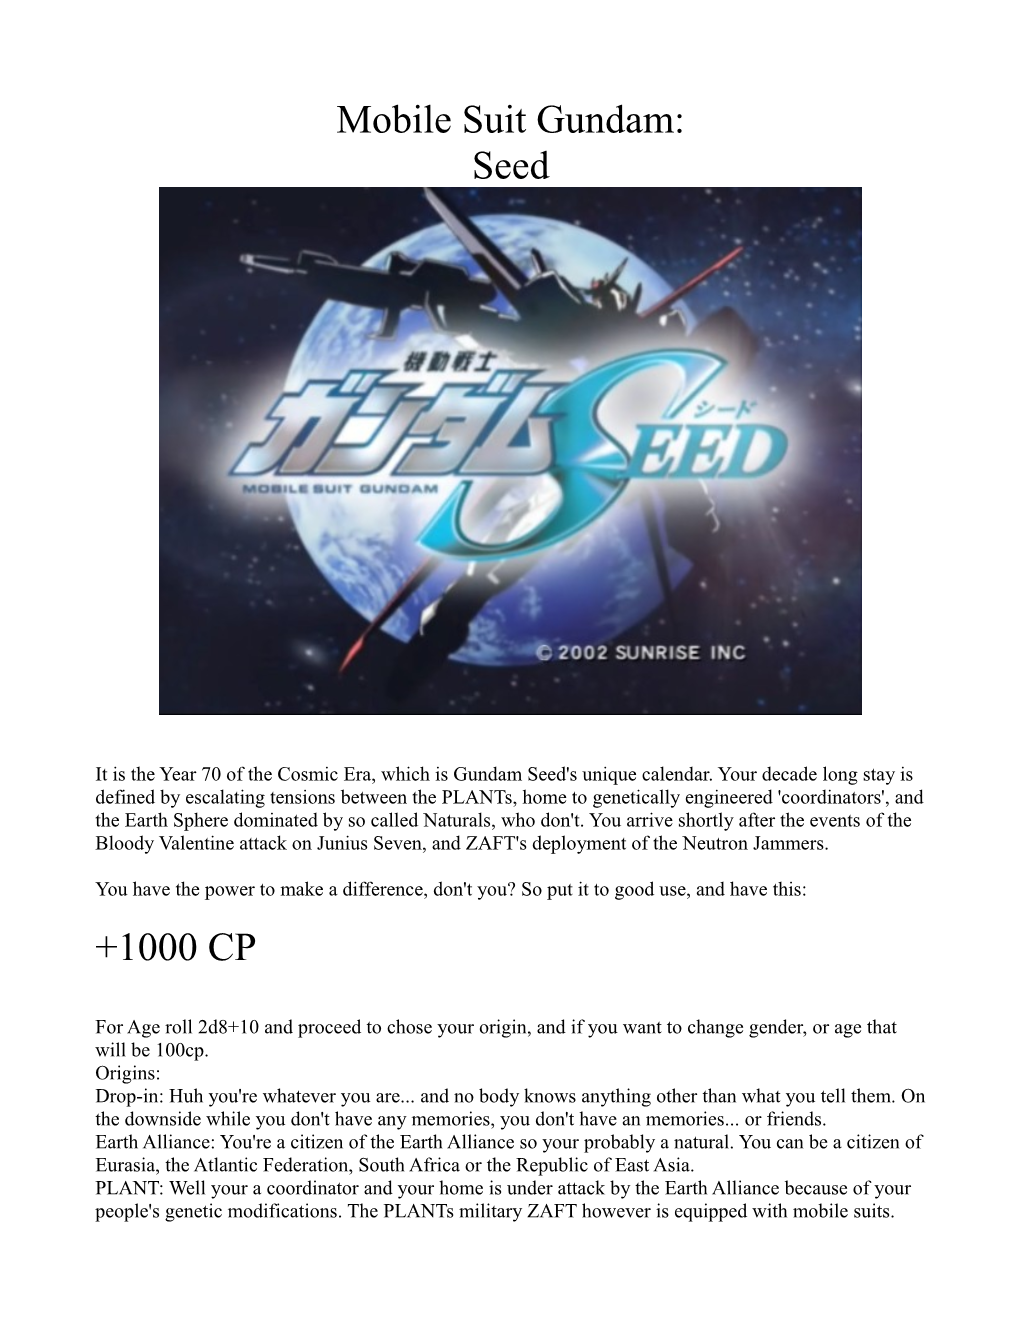 Mobile Suit Gundam: Seed +1000 CP